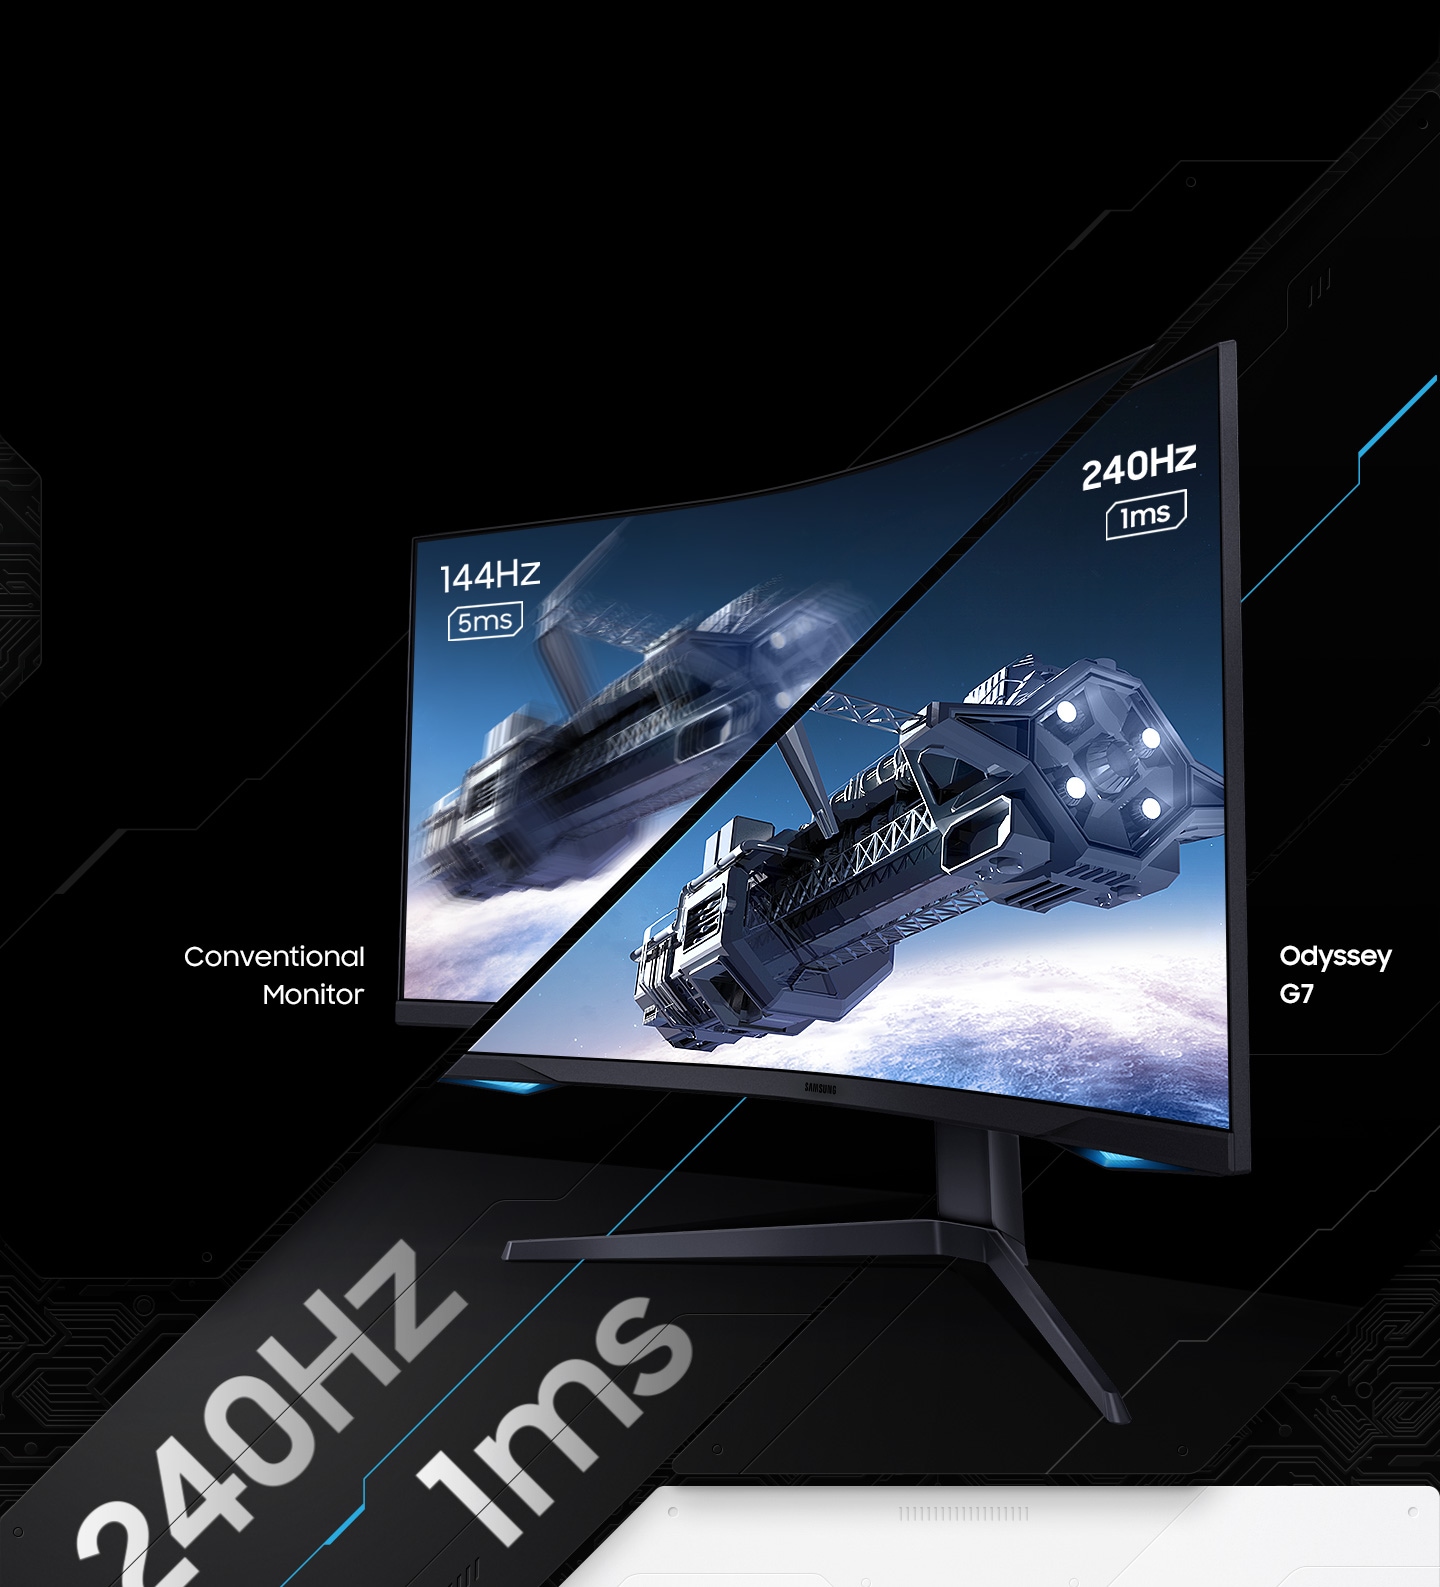 The Conventional Monitor and the Odyssey G7 are side by side. The Conventional Monitor says 144Hz 5ms and the screen is smeared, and the Odyssey G7 says 240Hz 1ms and the screen is clear.